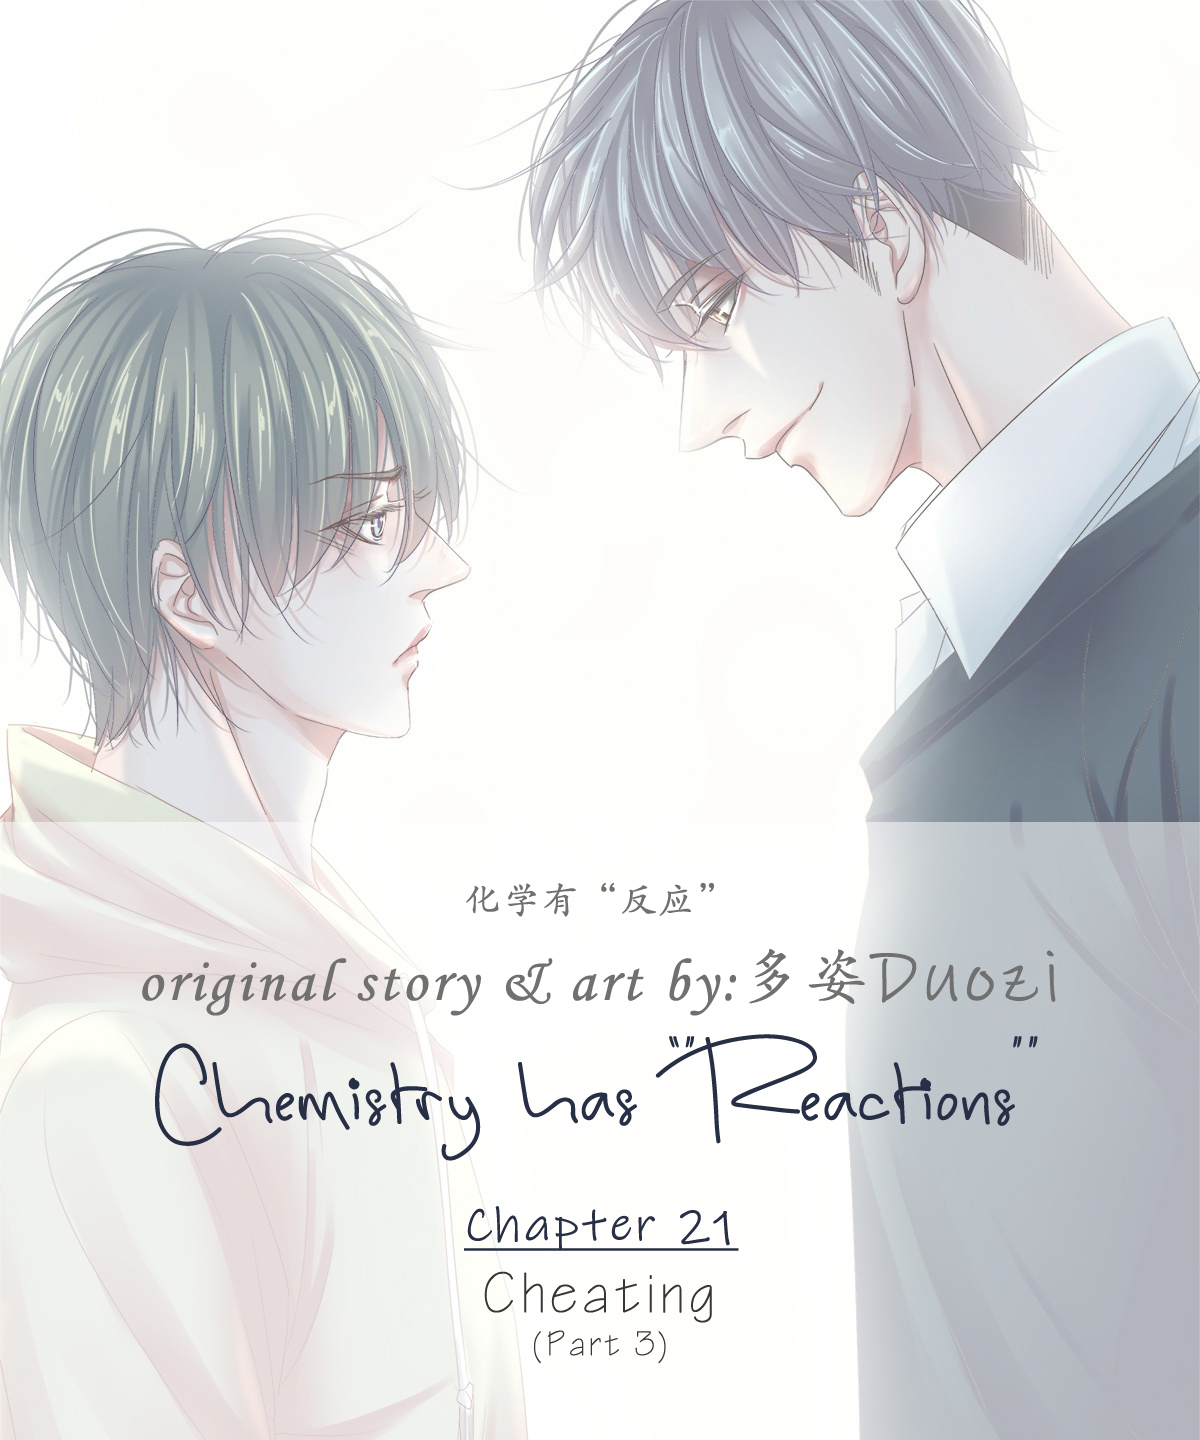 Chemistry has "Reactions" Vol. 1 Ch. 21